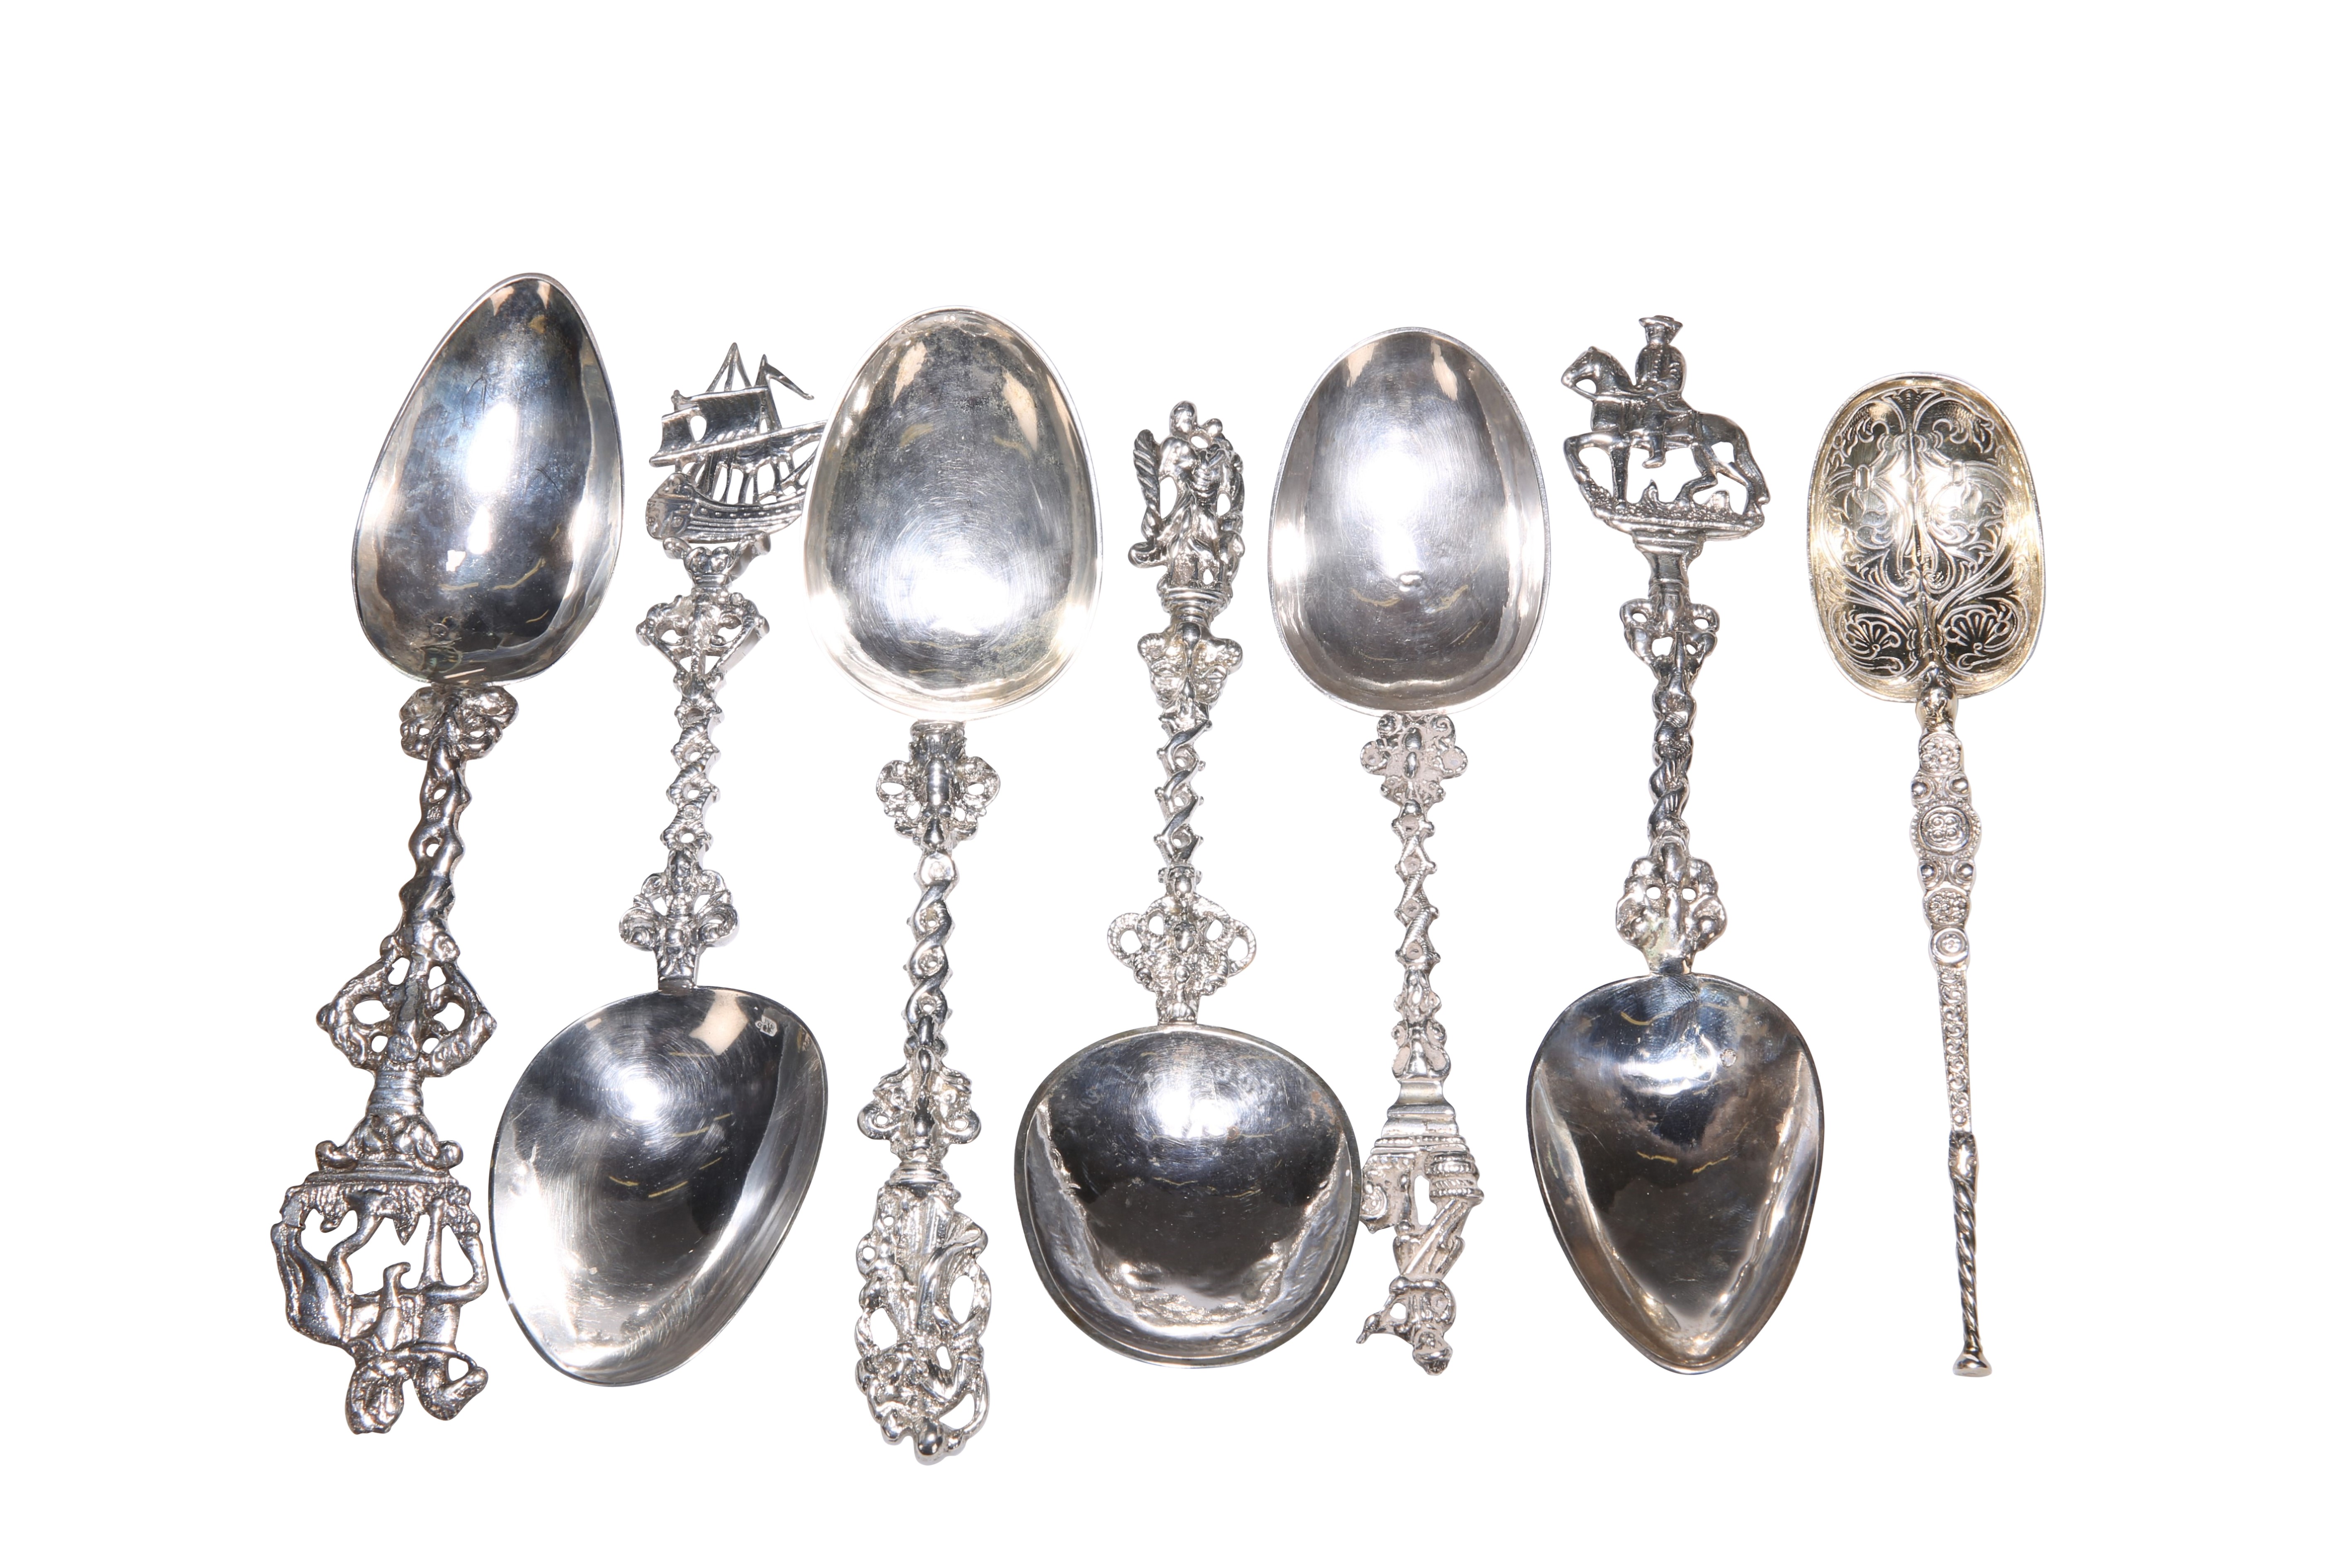 SIX DUTCH SILVER SPOONS AND A VICTORIAN SILVER-GILT COPY OF THE ANNOINTING SPOON